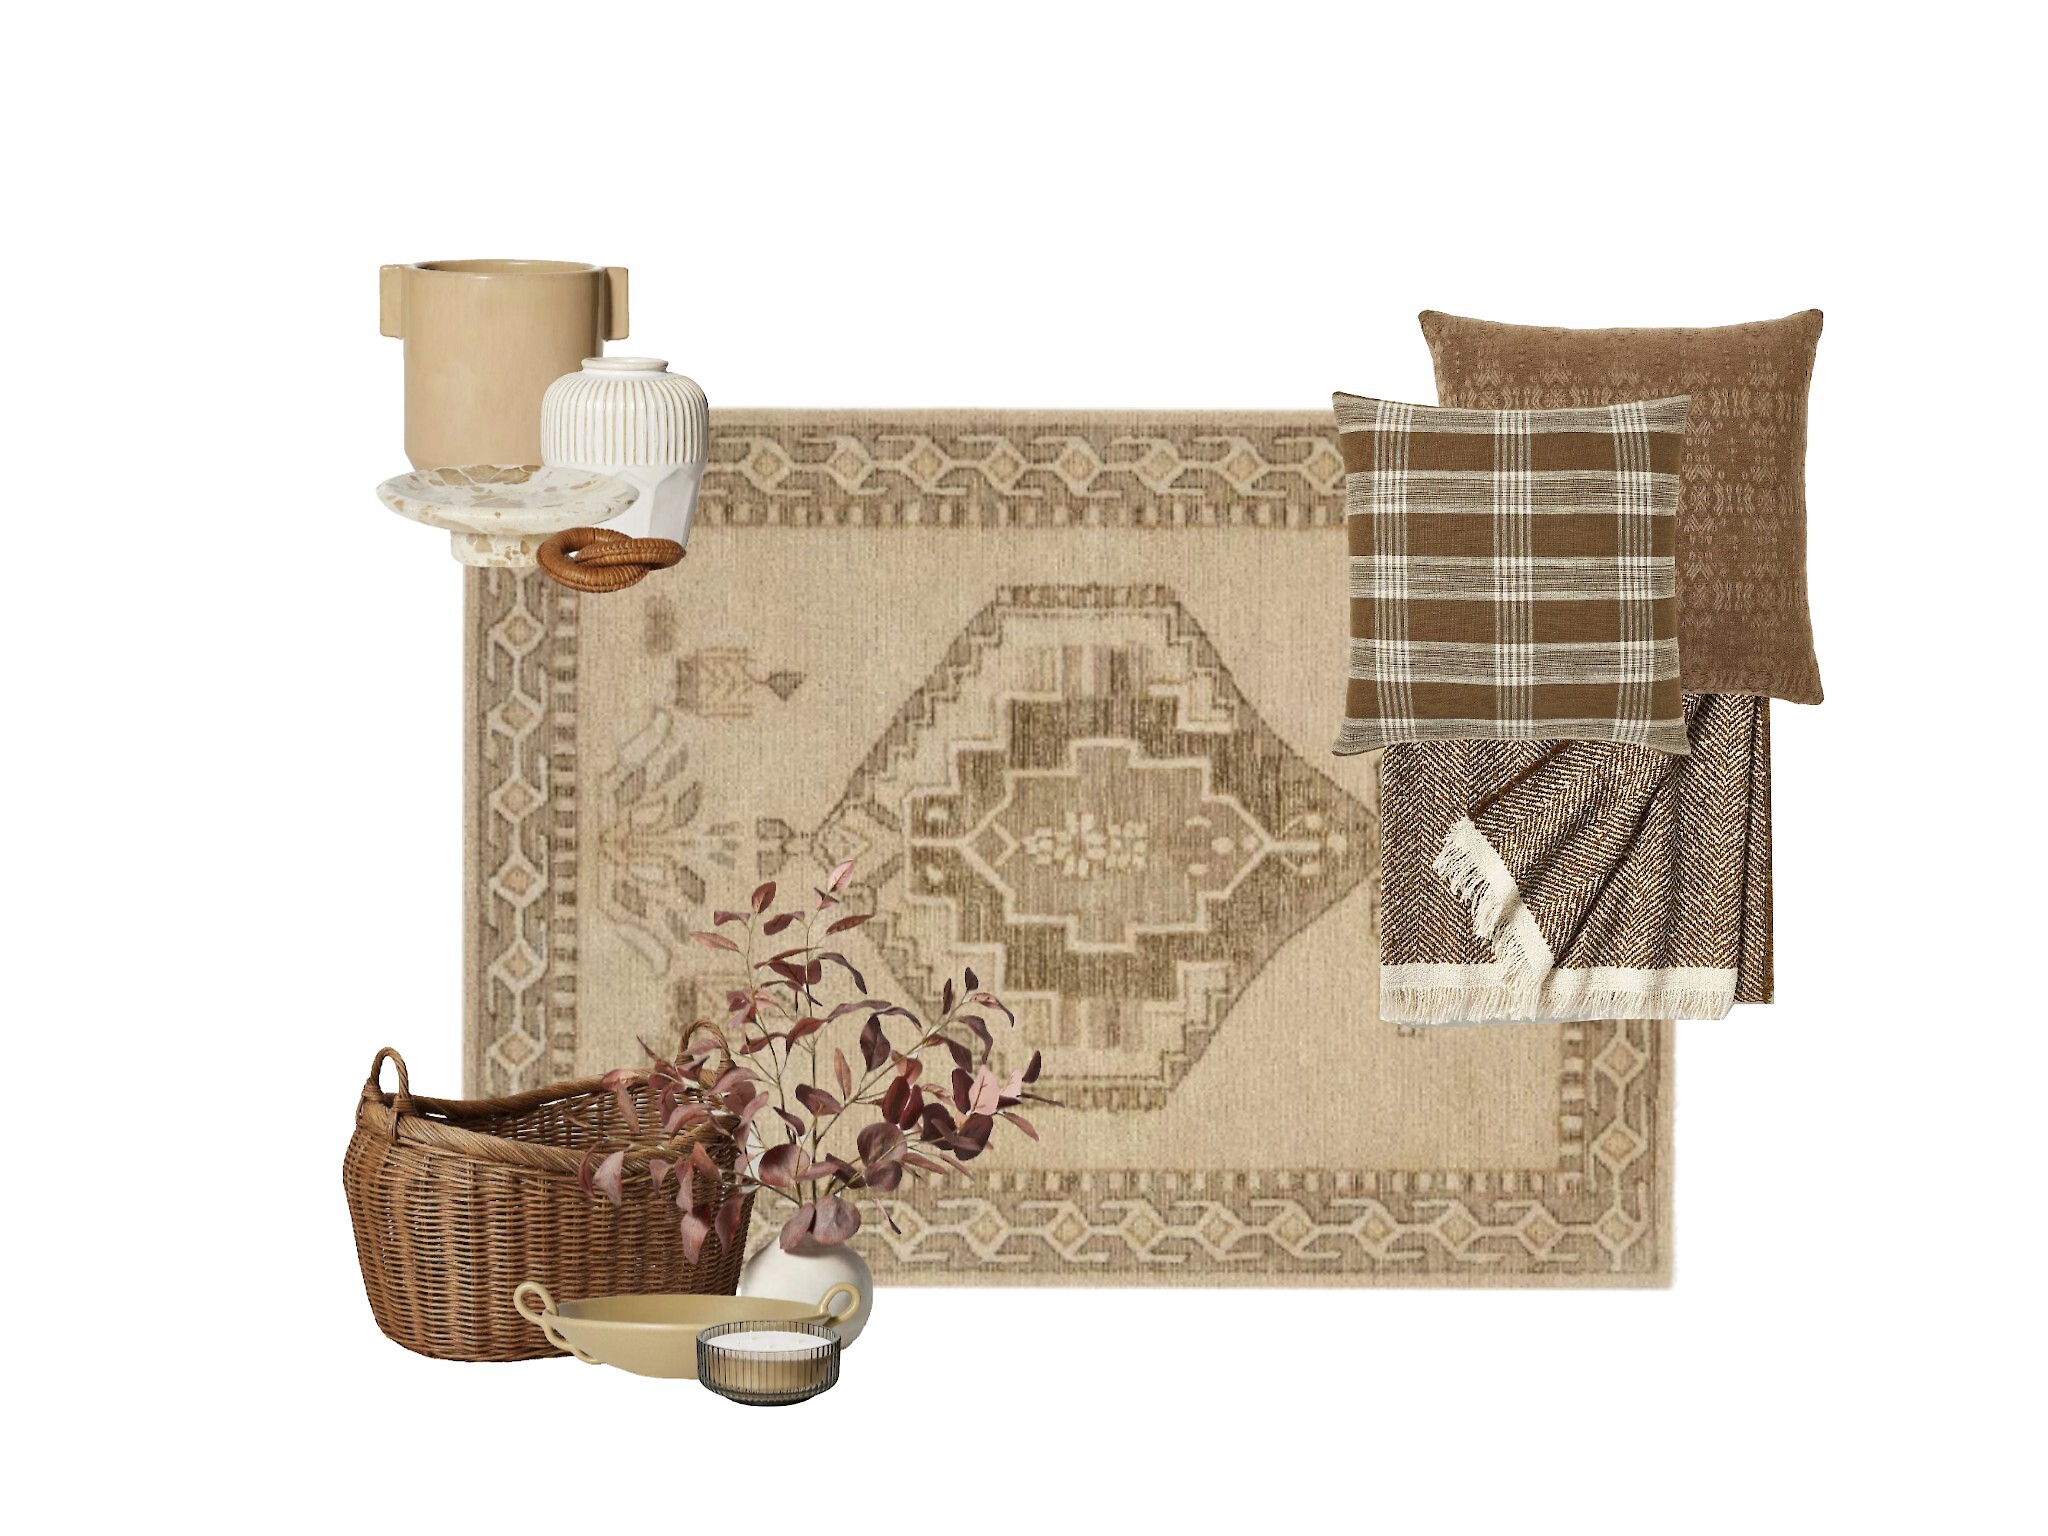 Transitional Home Fall Decor items